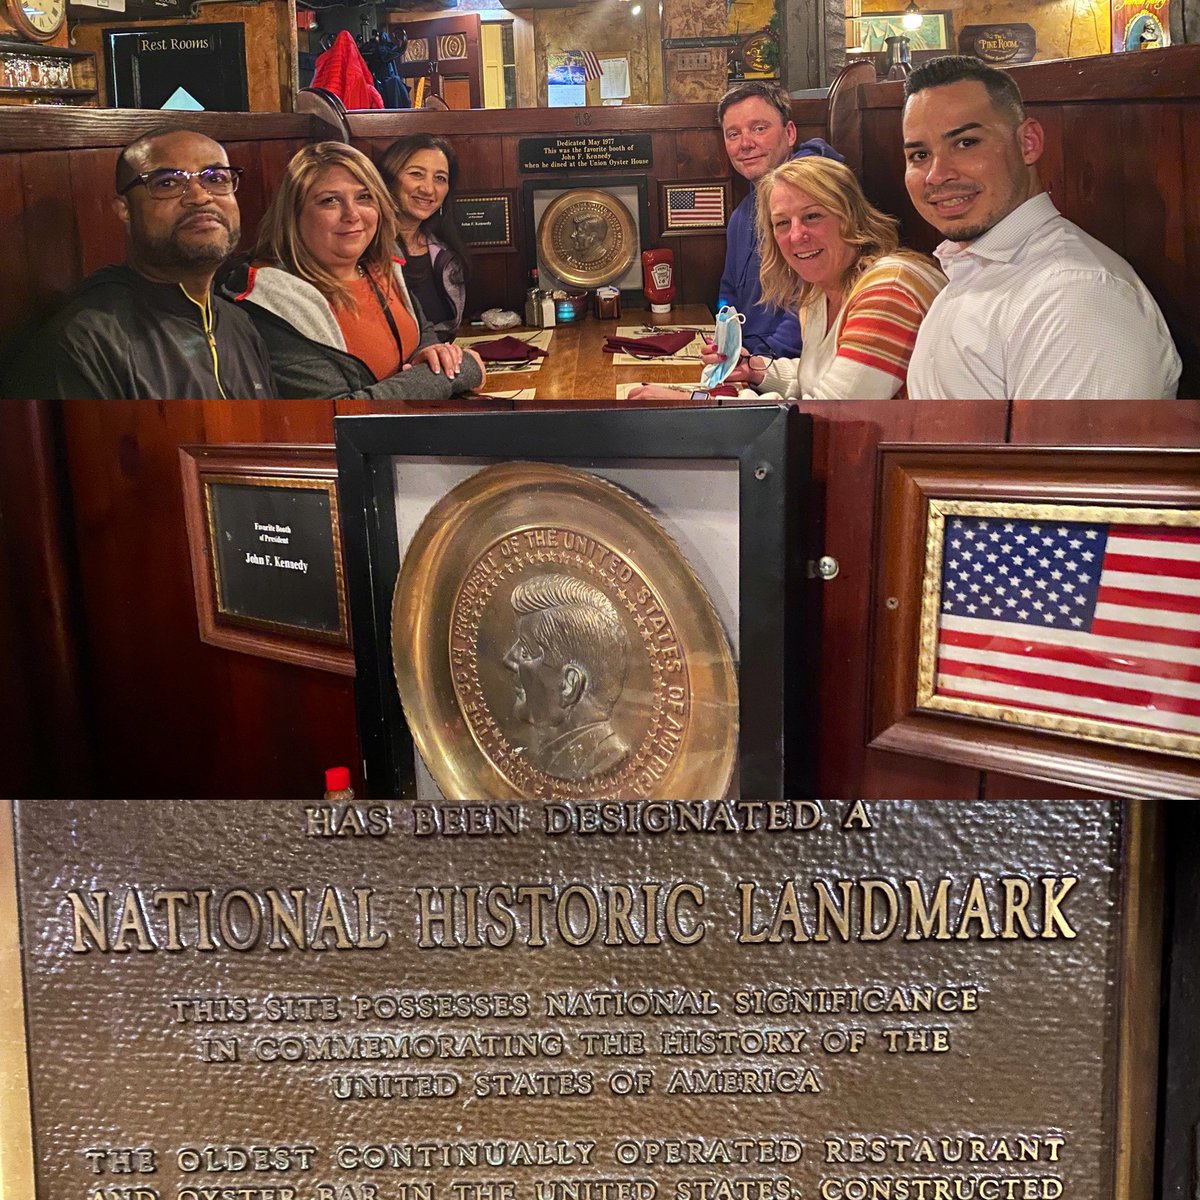 After a successful Boston hiring event, some of United’s finest HR teammates enjoy dinner at the historic Ye Old Union Oyster House.